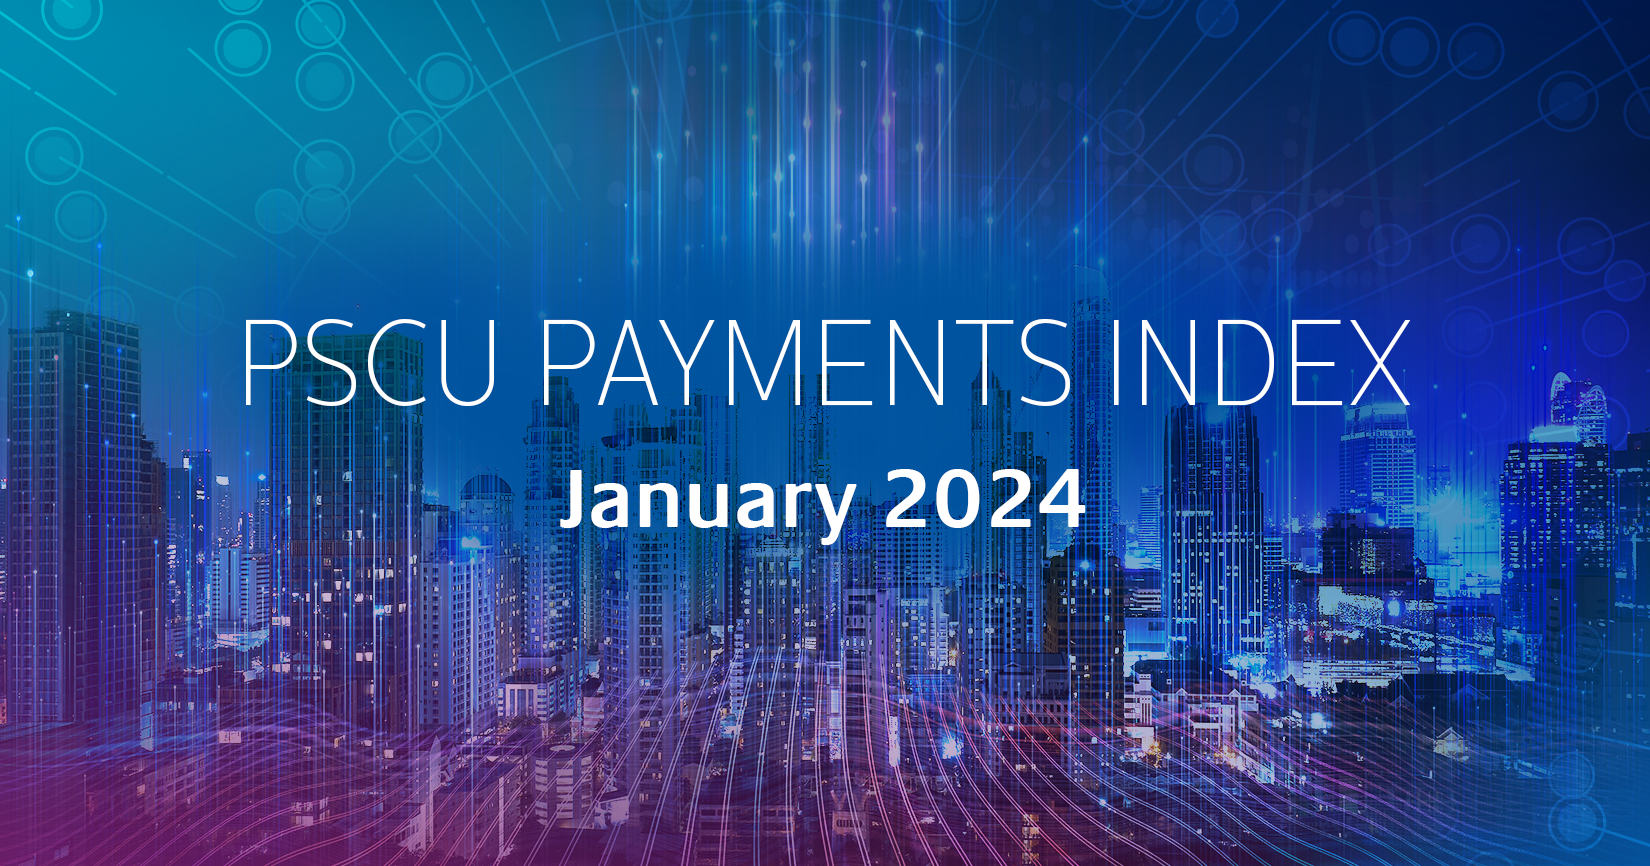 "PSCU Payments Index January 2024: A Deep Dive into Holiday Spending – Part 3 post thumbnail"